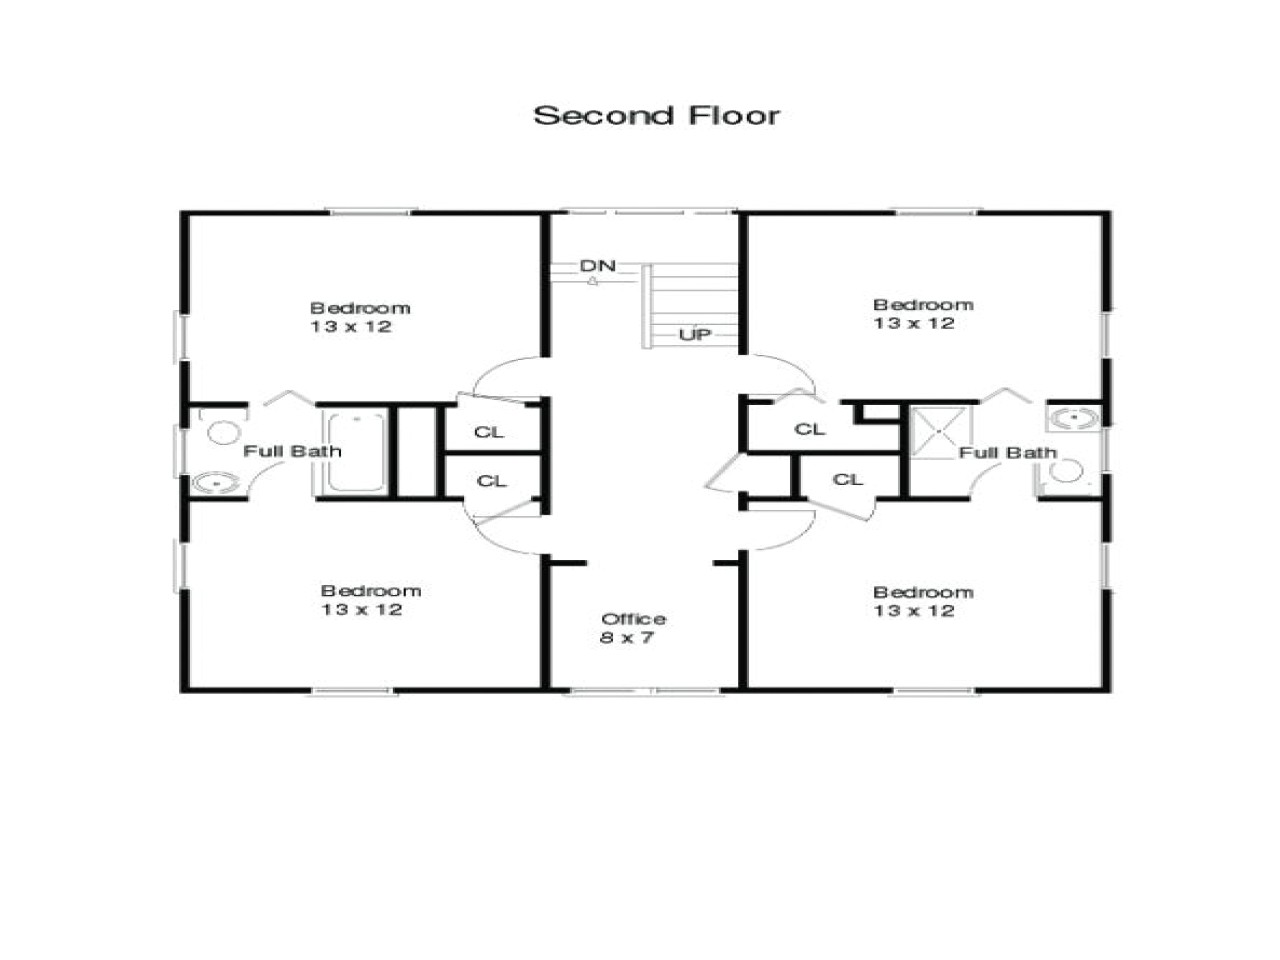 1319bdbc111fabf5 simple square house floor plans one story square house